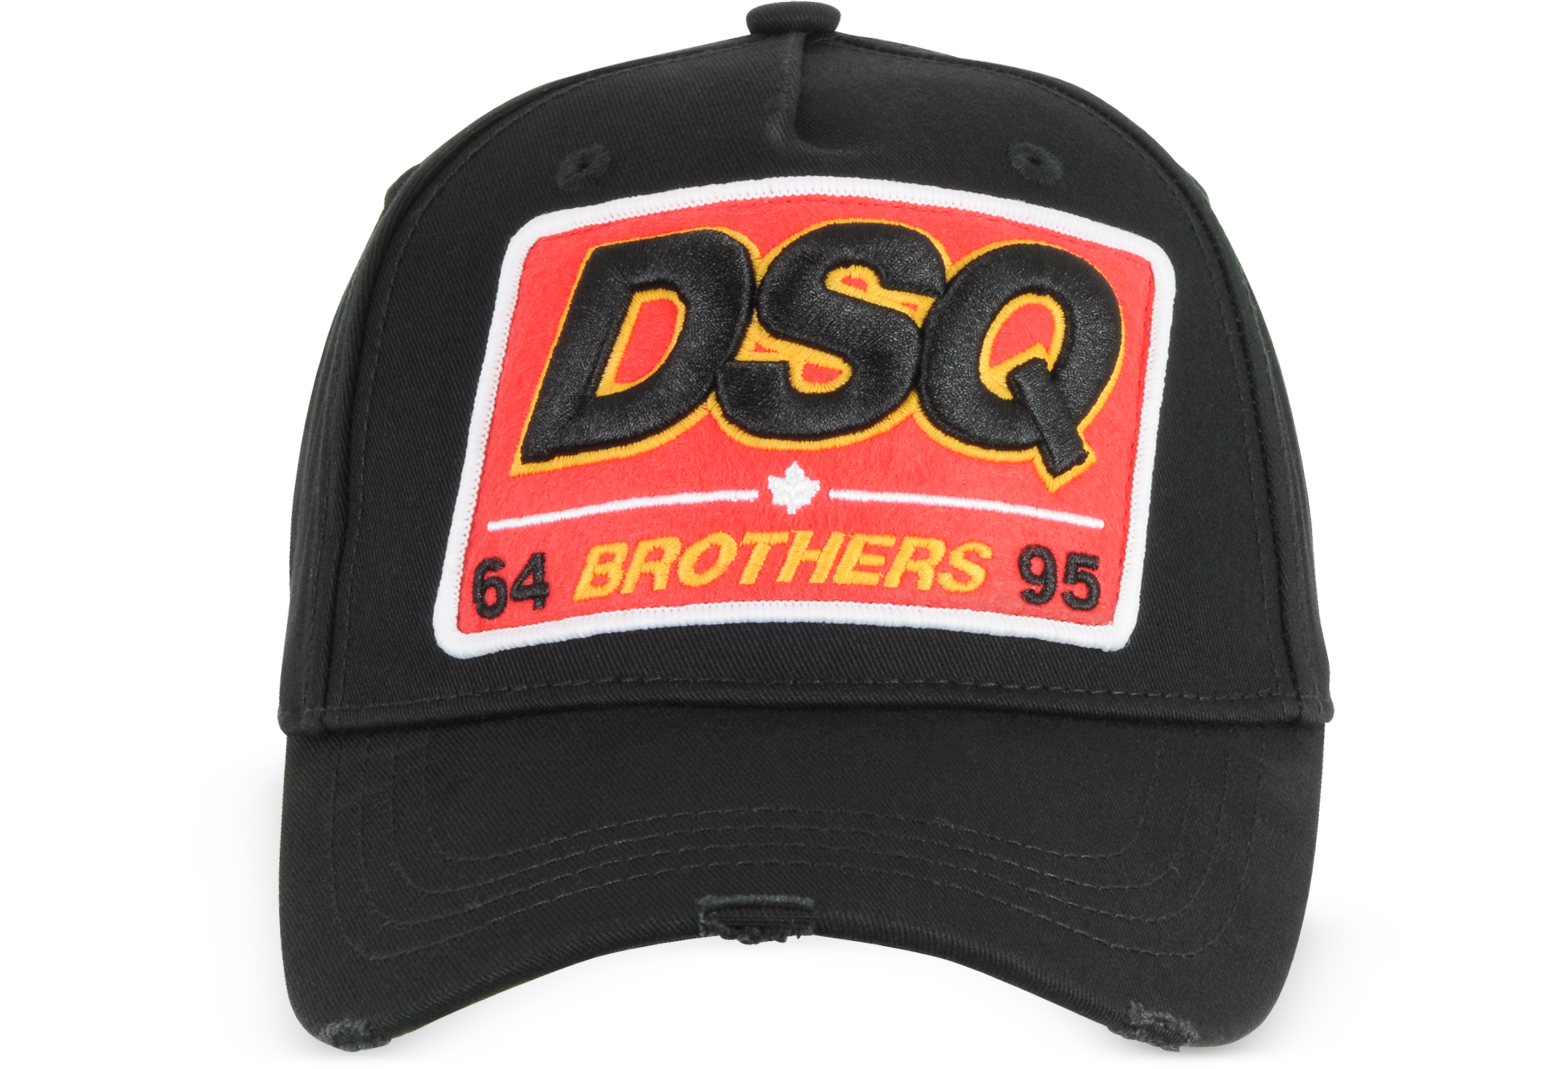 dsquared2 brothers cap